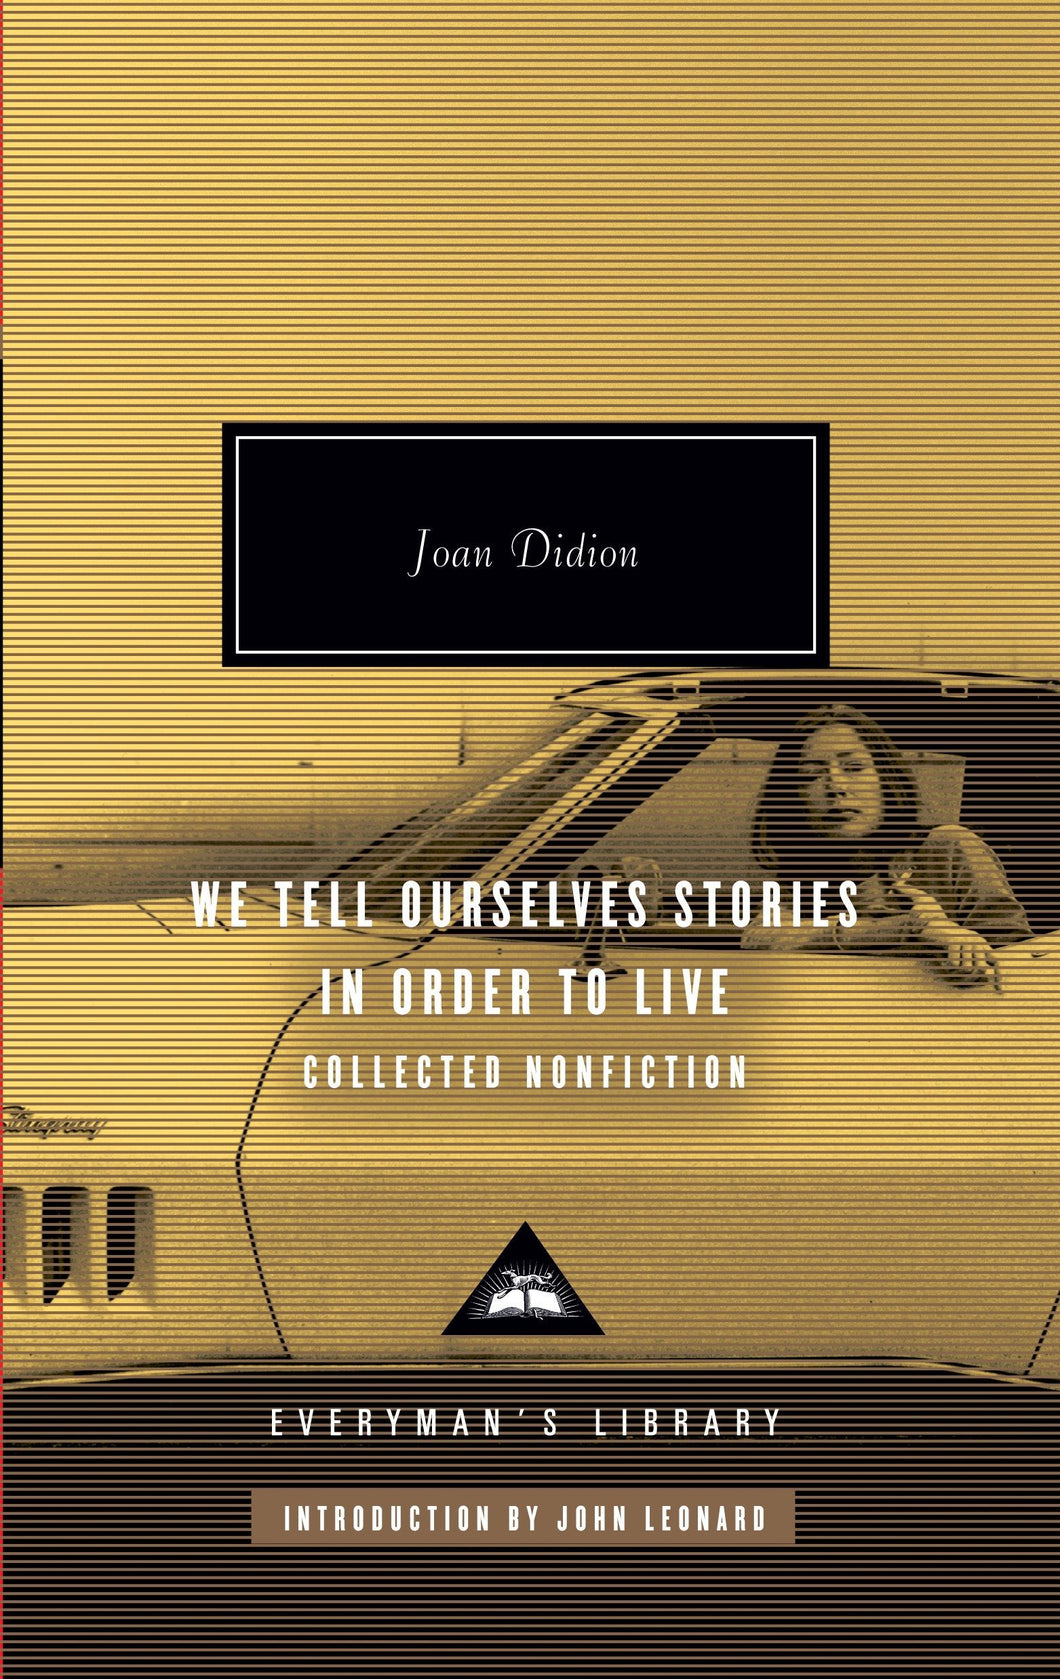 We Tell Ourselves Stories in Order to Live: Collected Nonfiction by Joan Didion